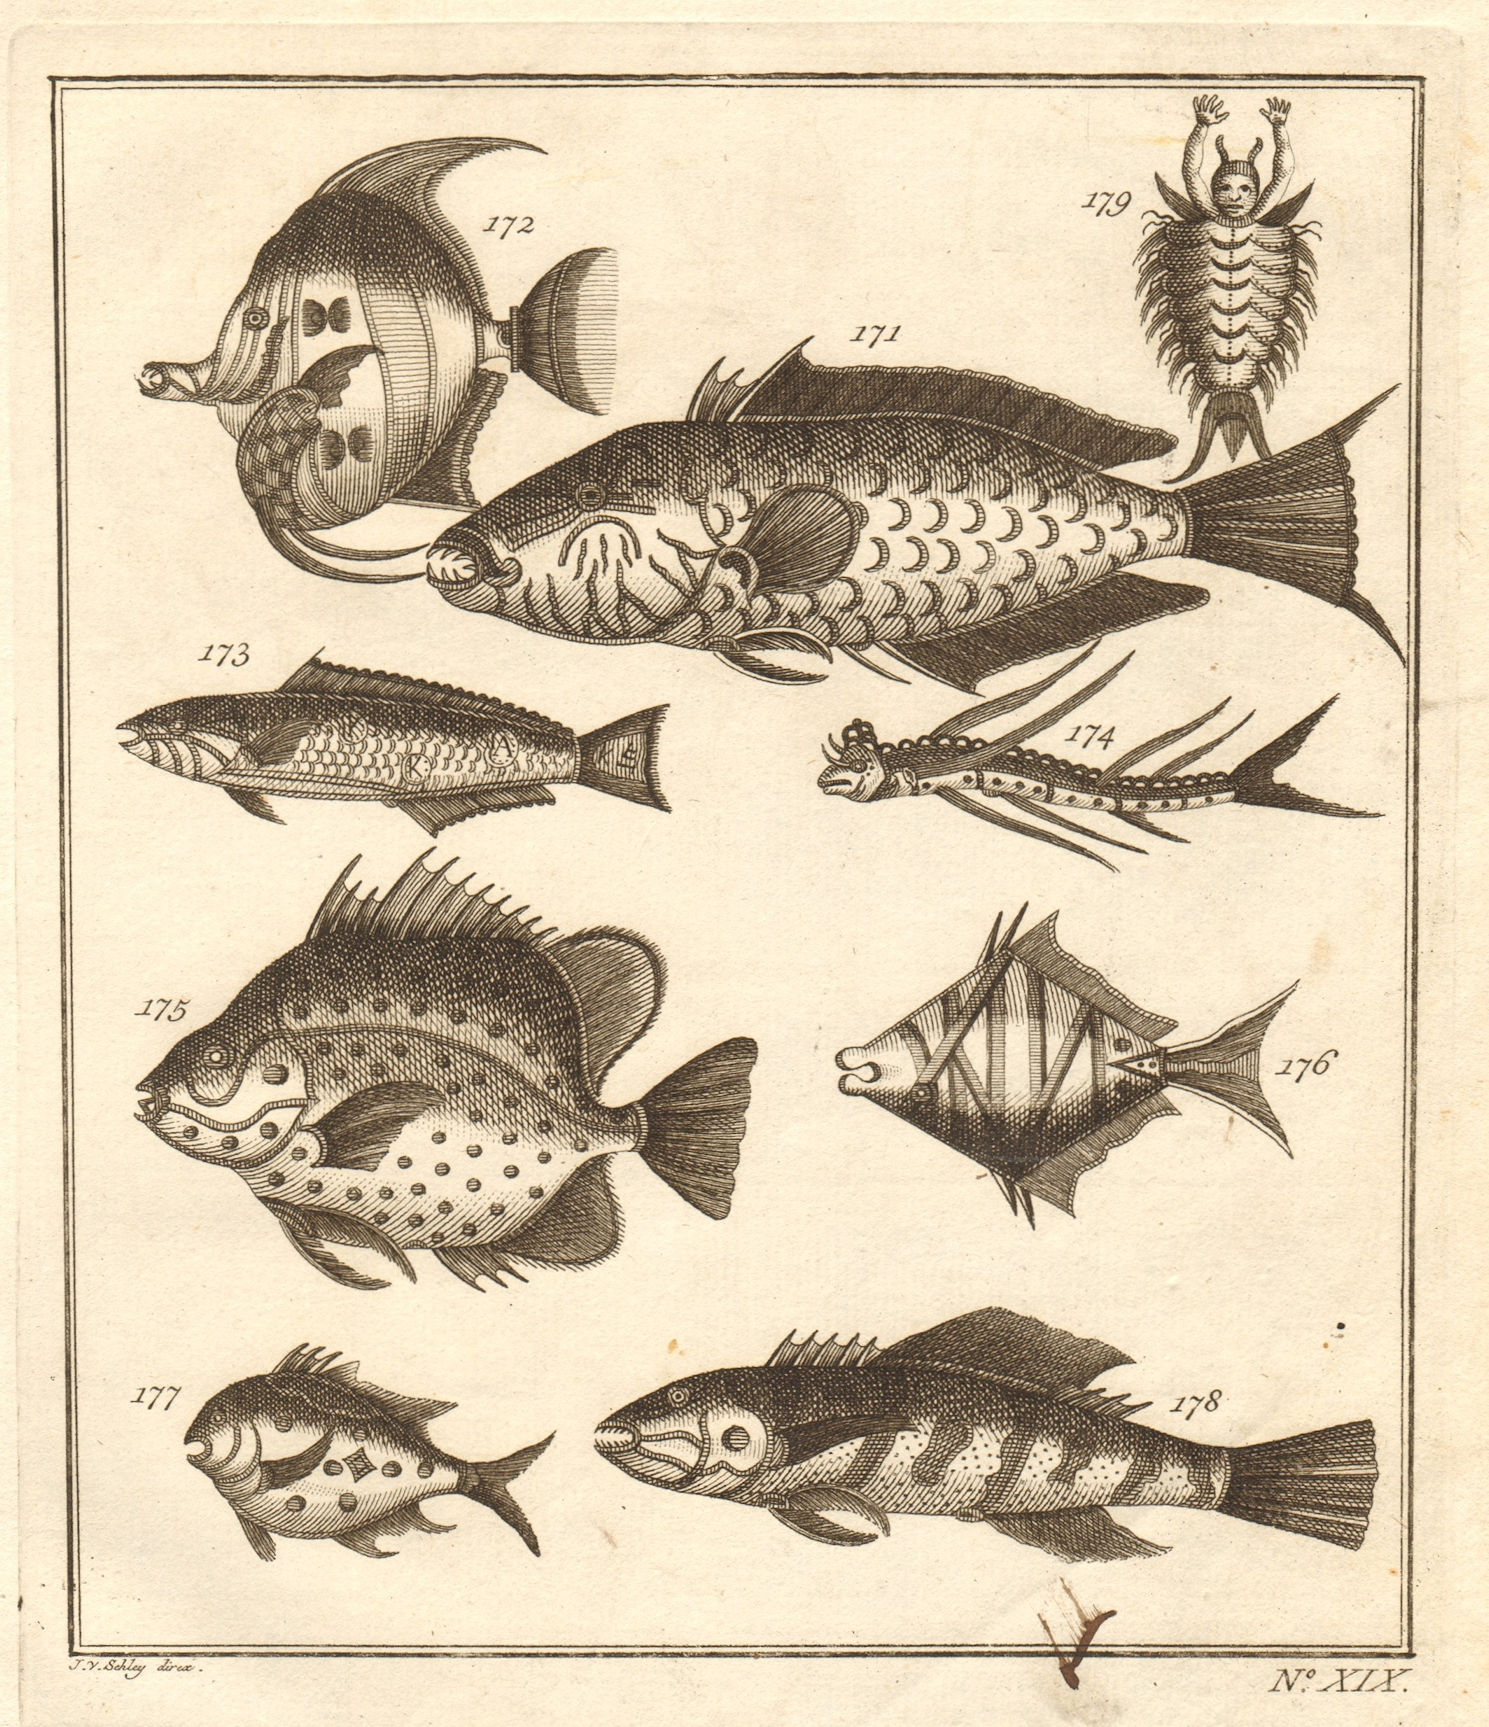 Associate Product XIX. Poissons d'Ambione. Indonesia Moluccas Maluku tropical fish. SCHLEY 1763